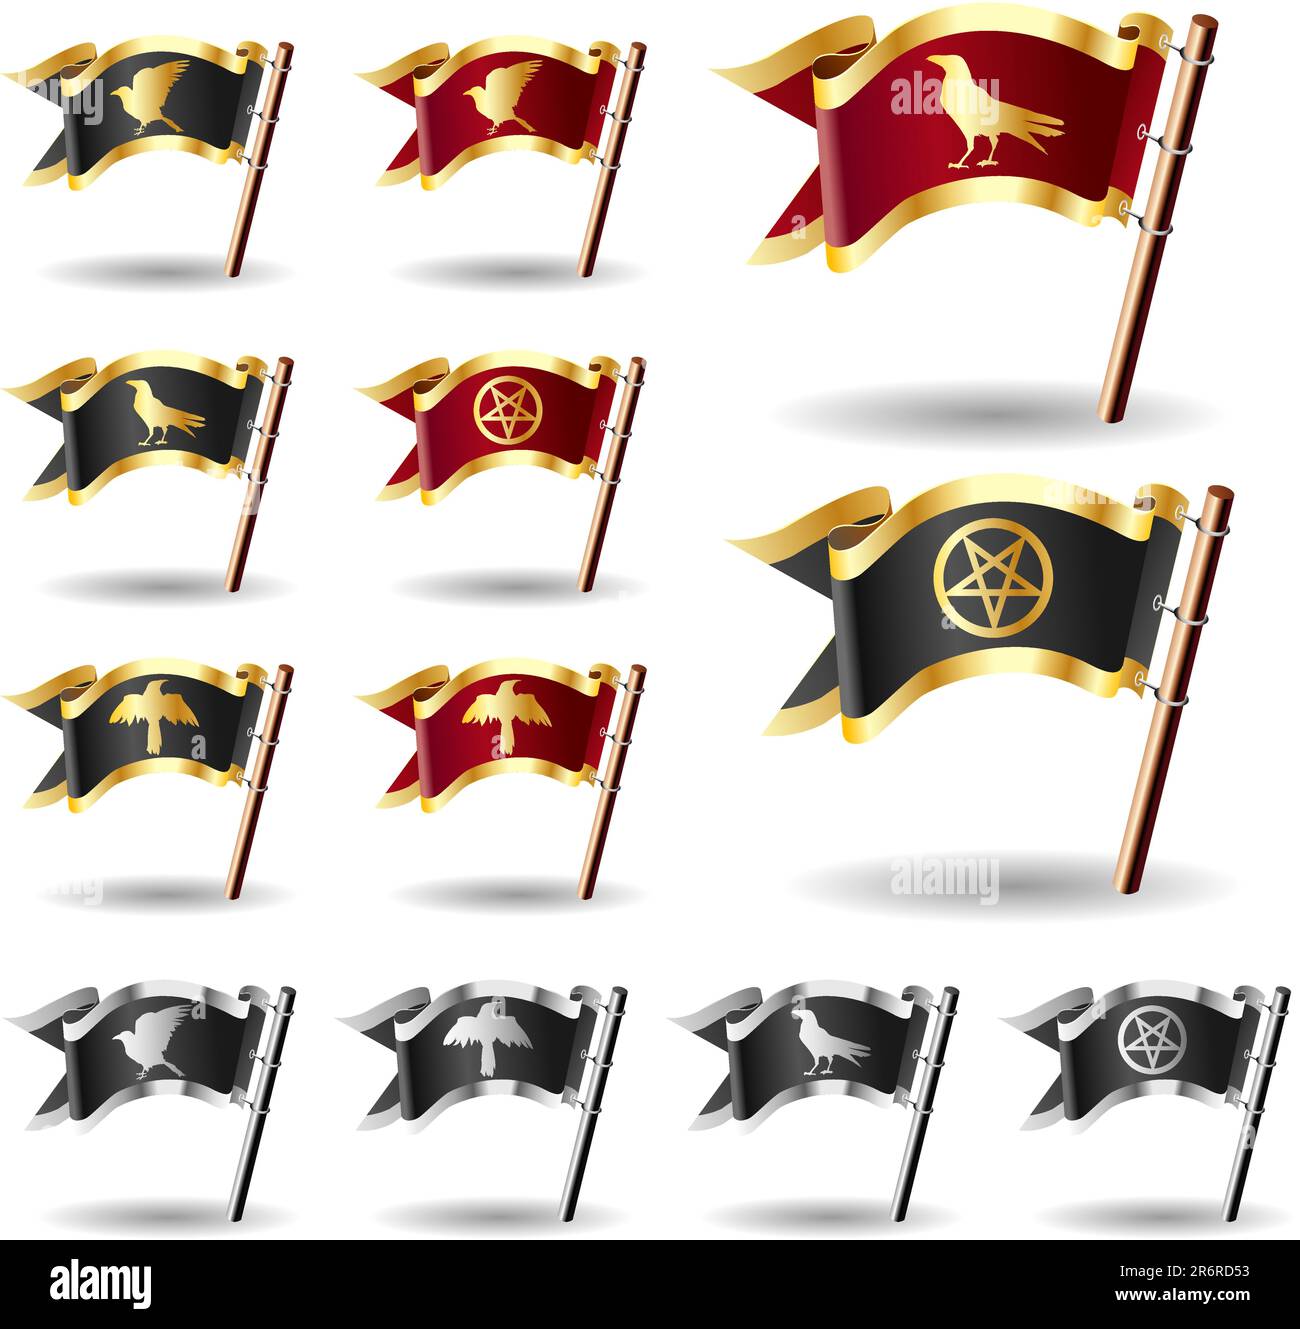 Pentagram, crow, and raven icons on vector flag button set - red and gold, black and silver, and black and gold heralds Stock Vector